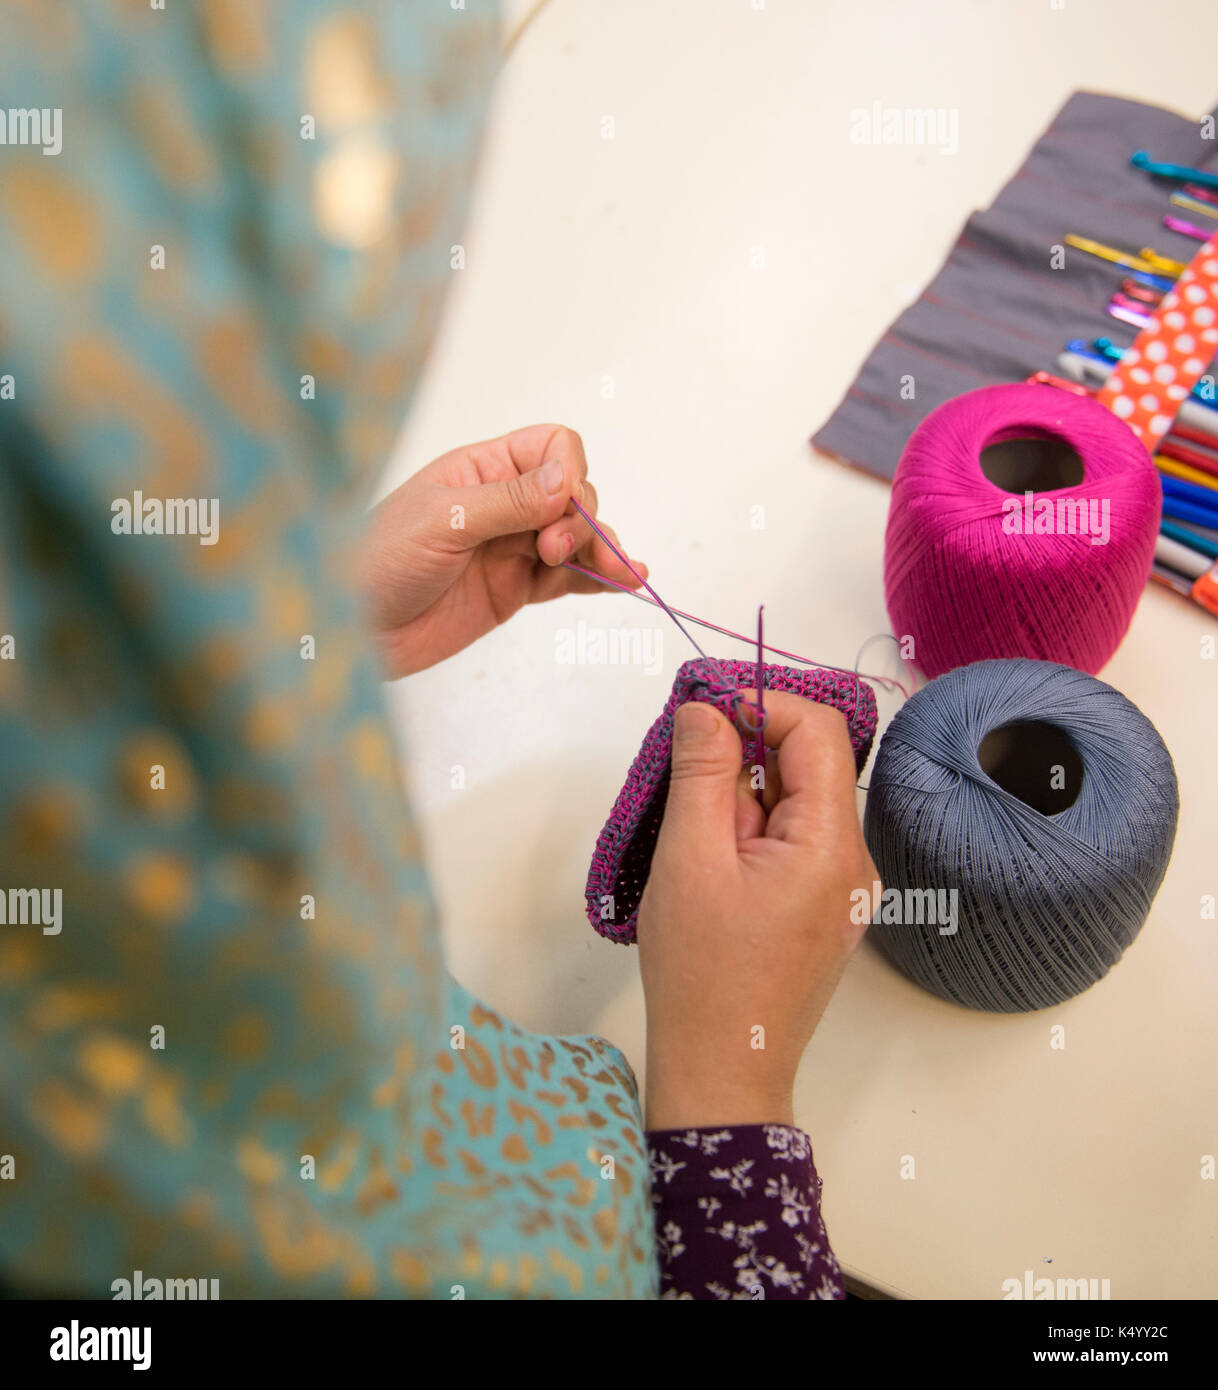 Berlin, Germany. 6th Sep, 2017. A refugee woman from Afghanistan participates in a sewing course organised by Kati Hyyppaei from Finalnd in the room of a refugee home in Berlin, Germany, 6 September 2017. Kati Hyyppaei from Finland voluntarily offers sewing courses for refugees each week. Photo: Paul Zinken/dpa/Alamy Live News Stock Photo